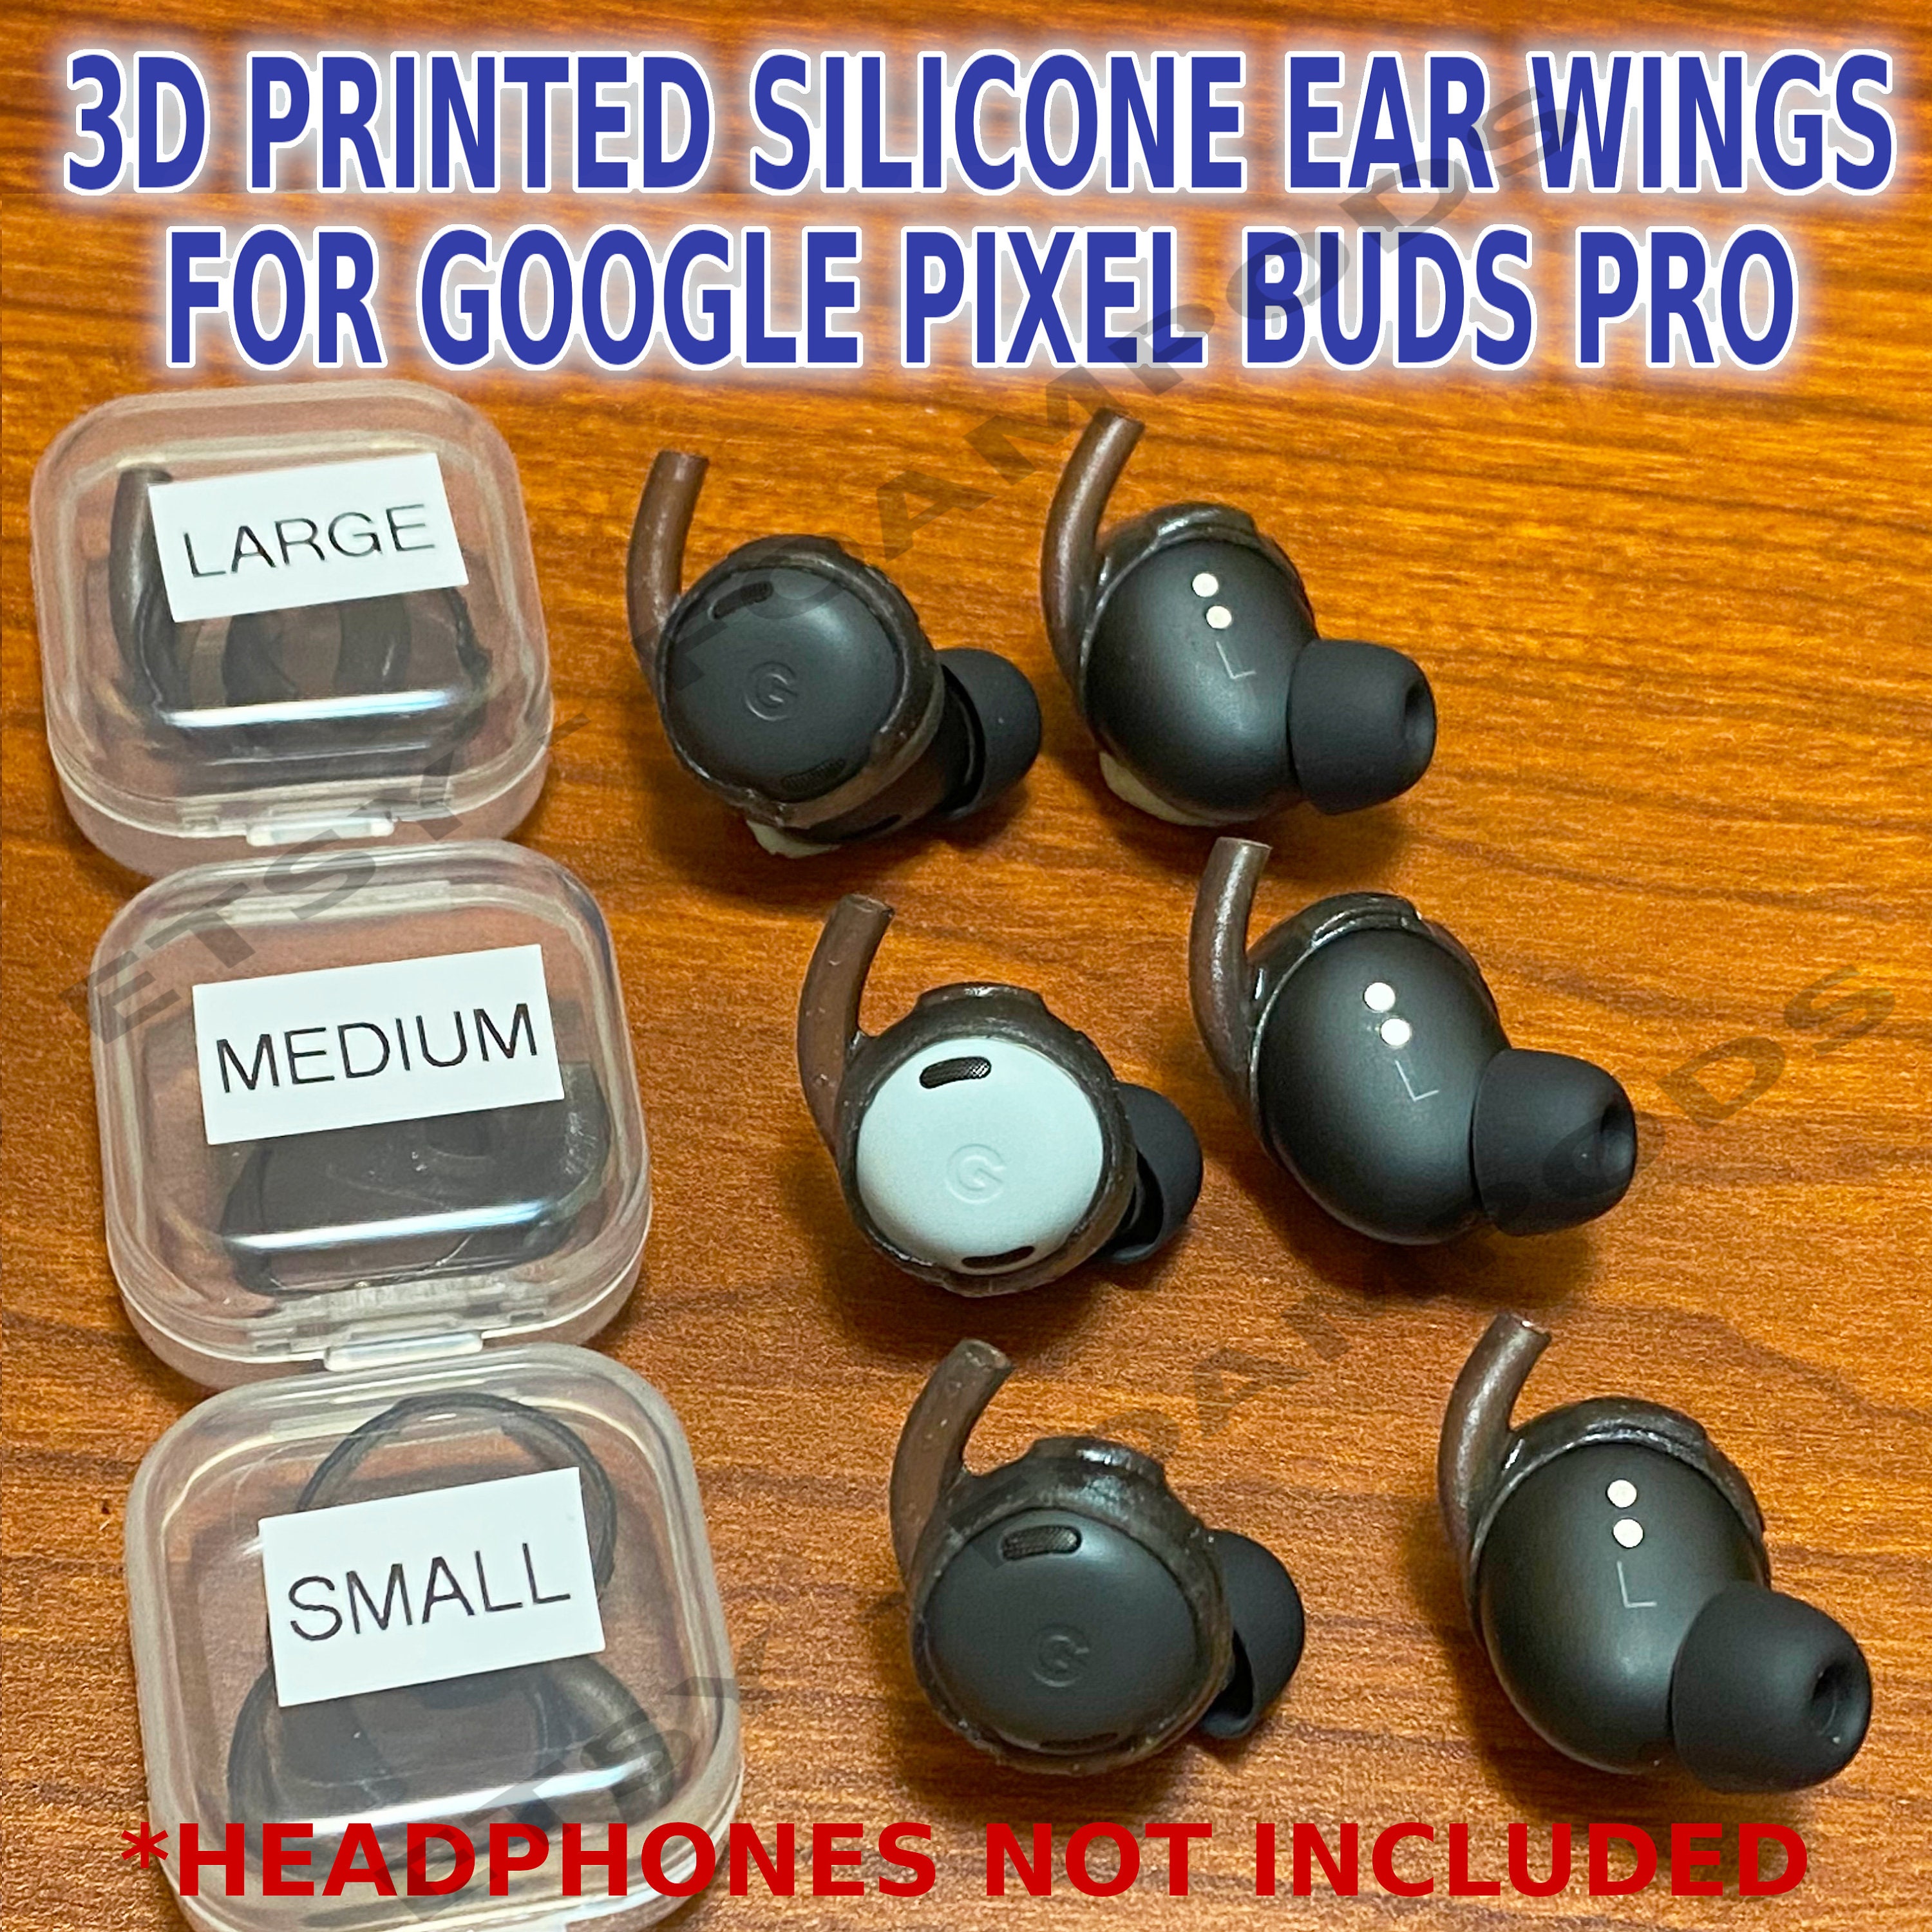 Google Pixel Buds Pro - Wireless Earbuds with Active Noise